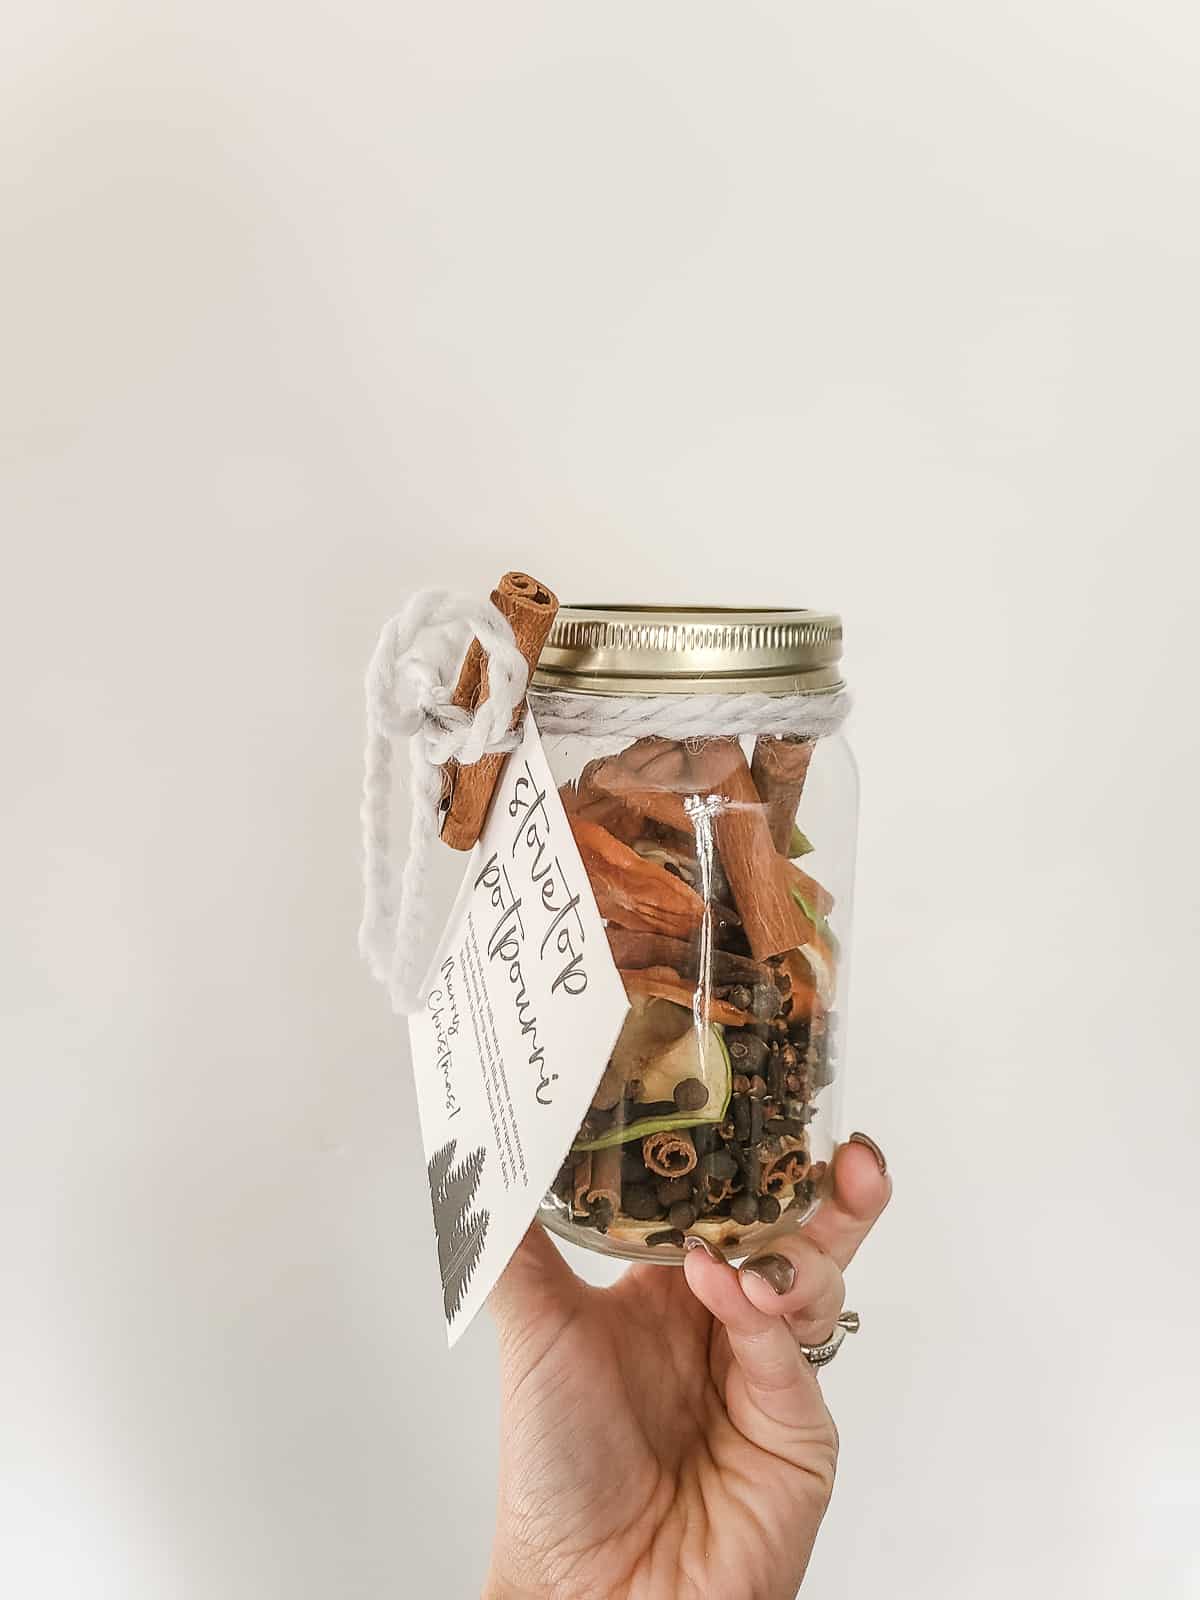 DIY Simmering Potpourri Gift And Printable Tag - House of Hawthornes